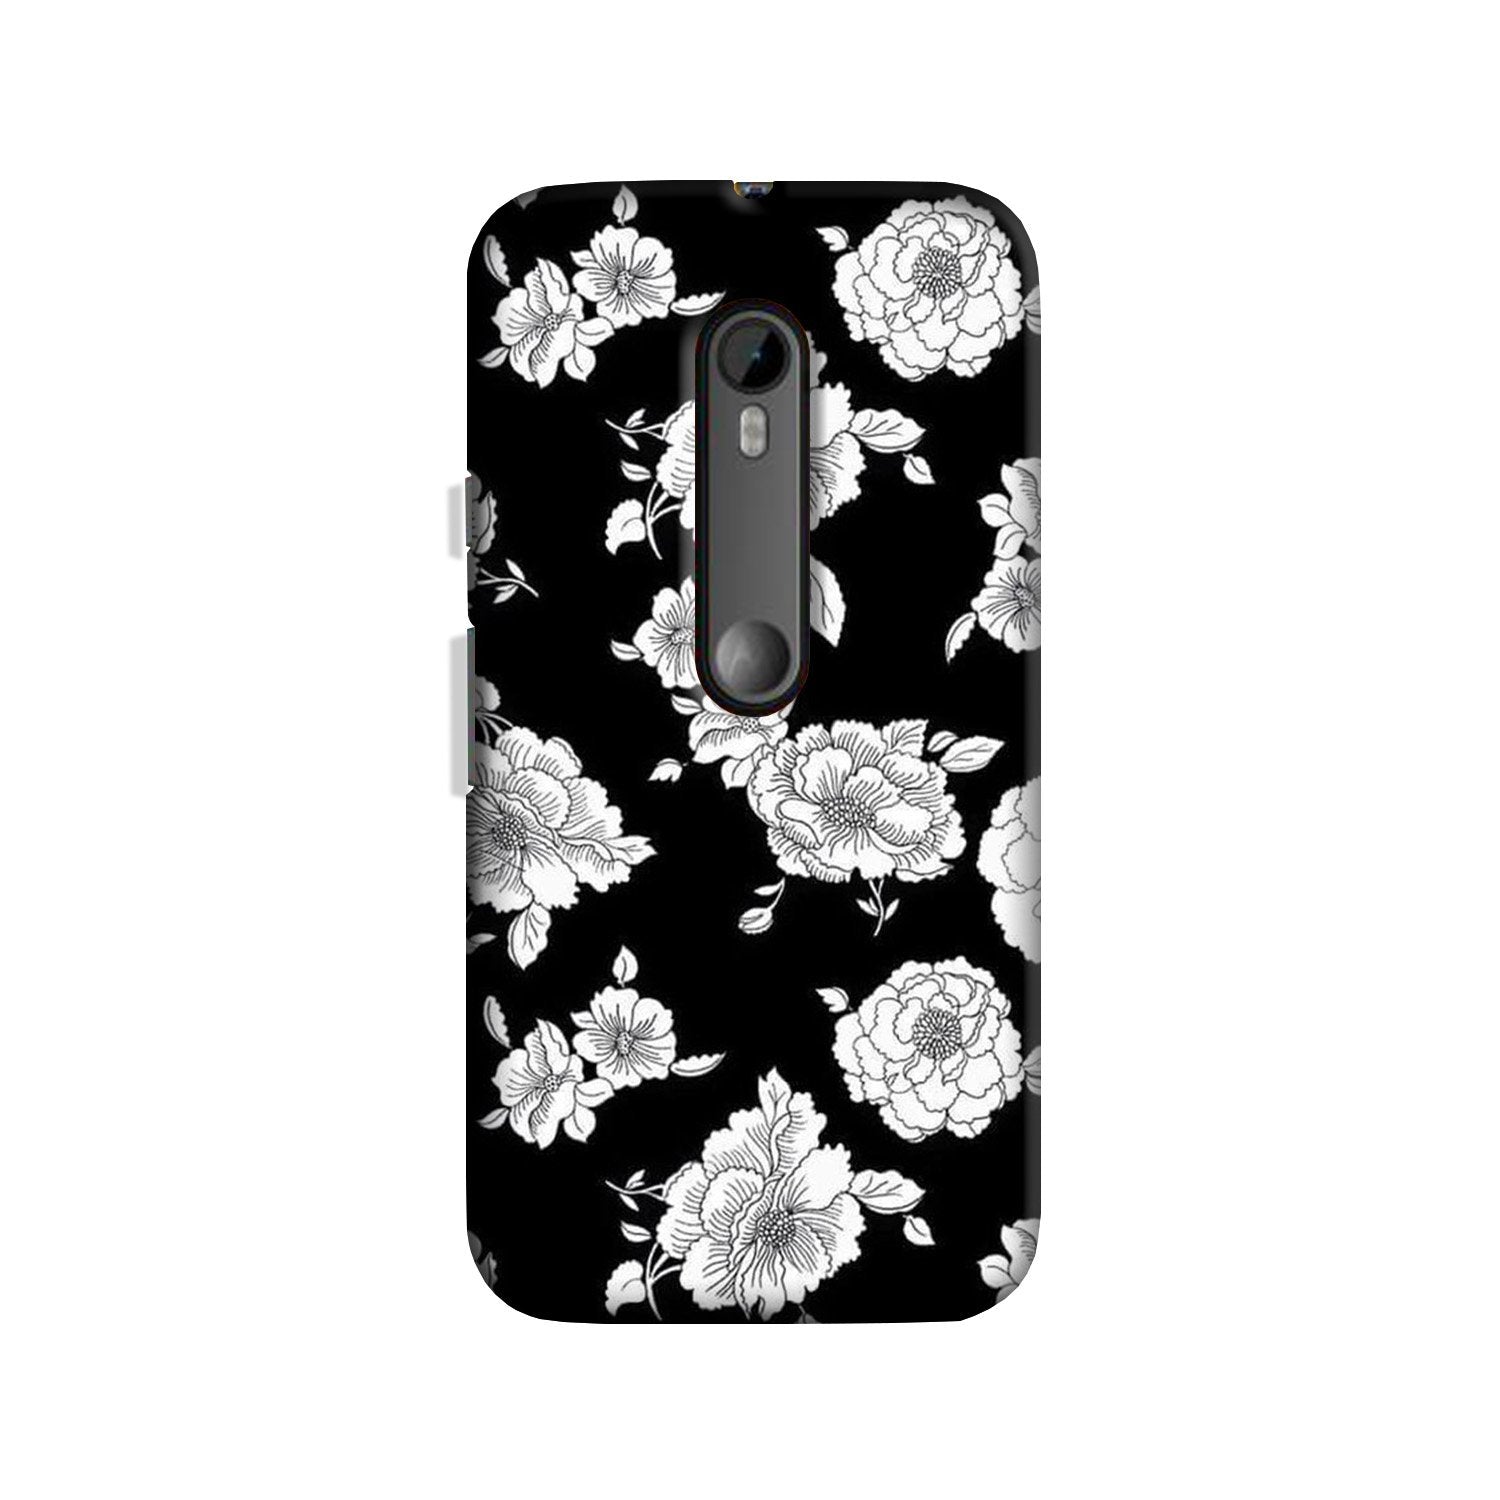 White flowers Black Background Case for Moto X Play